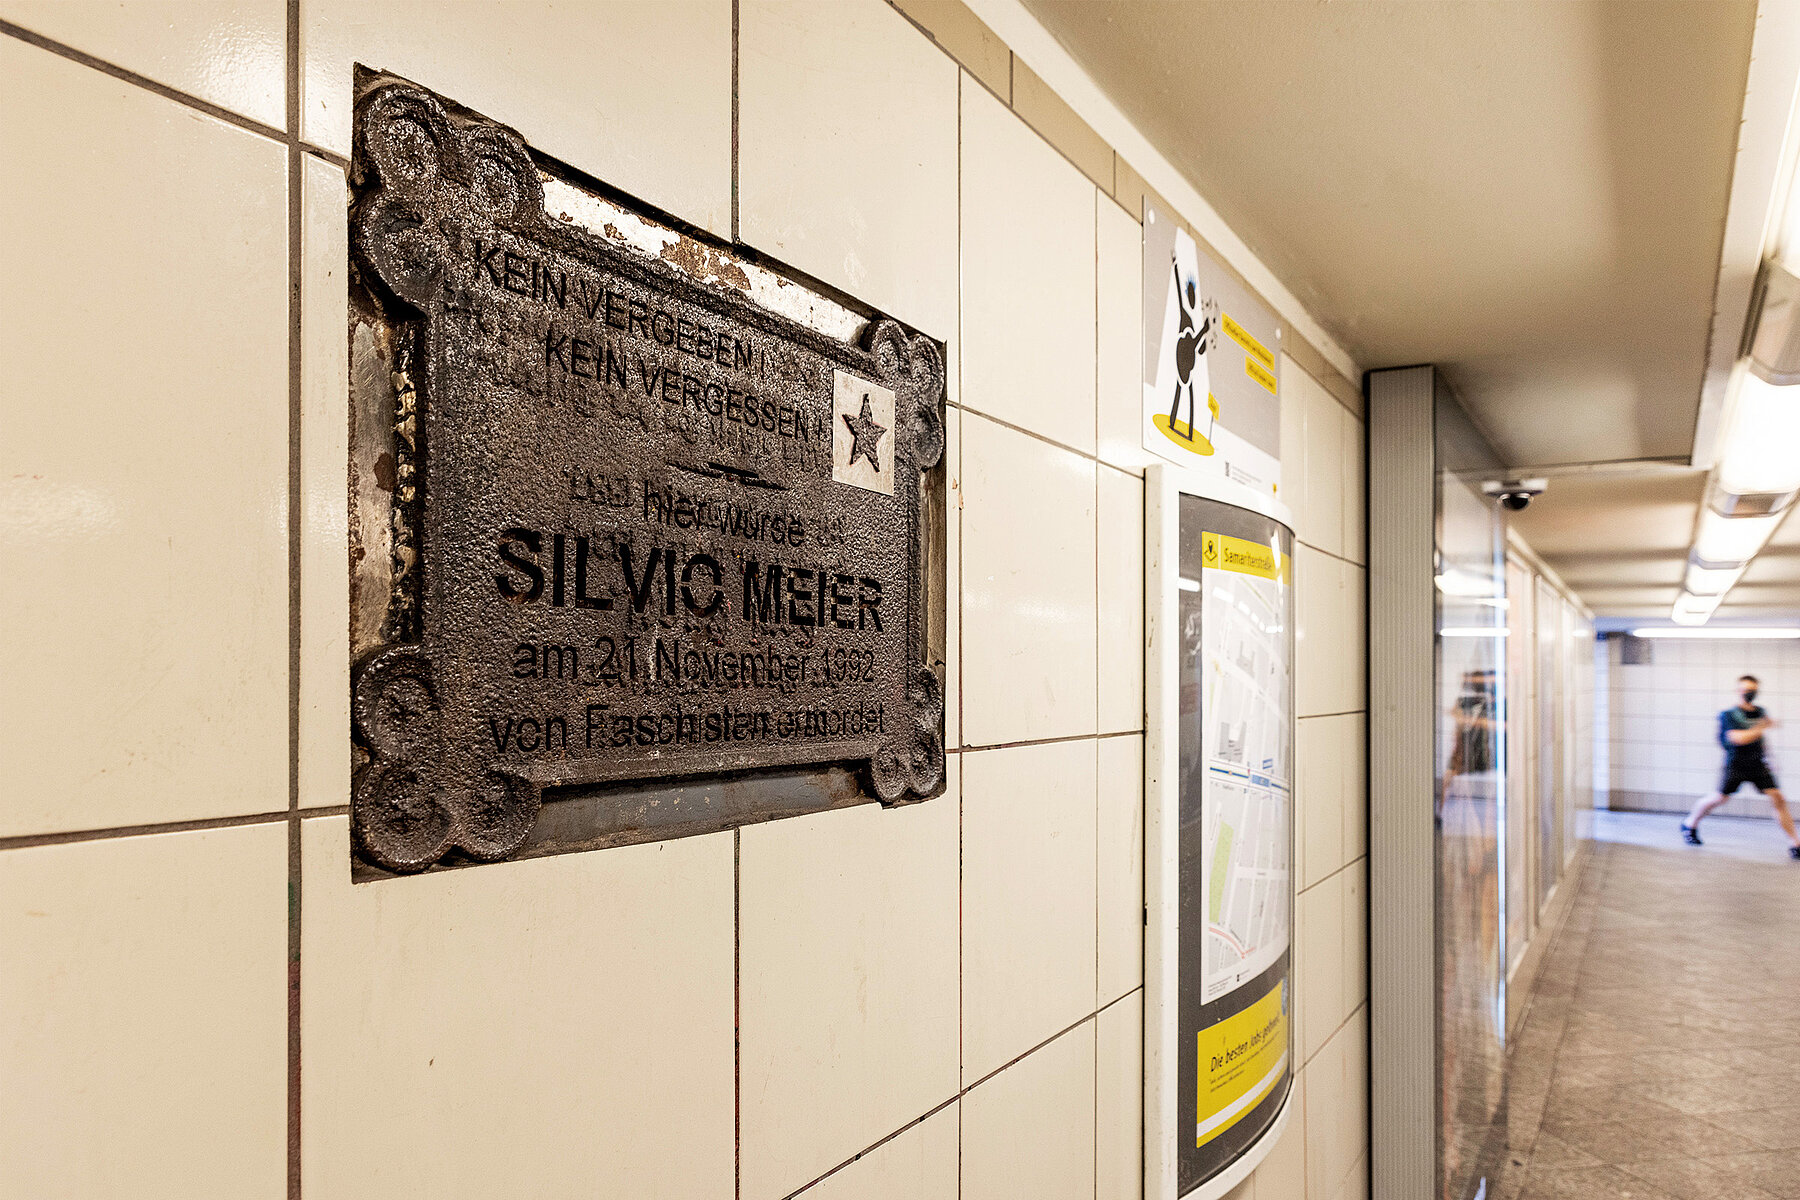 Memorial plaque for Silvio Meier on the intermediary level of the subway station. It reads: No Forgiveness, No Forgetting. Silvio Meier was murdered here on November 21, 1992 by fascists.